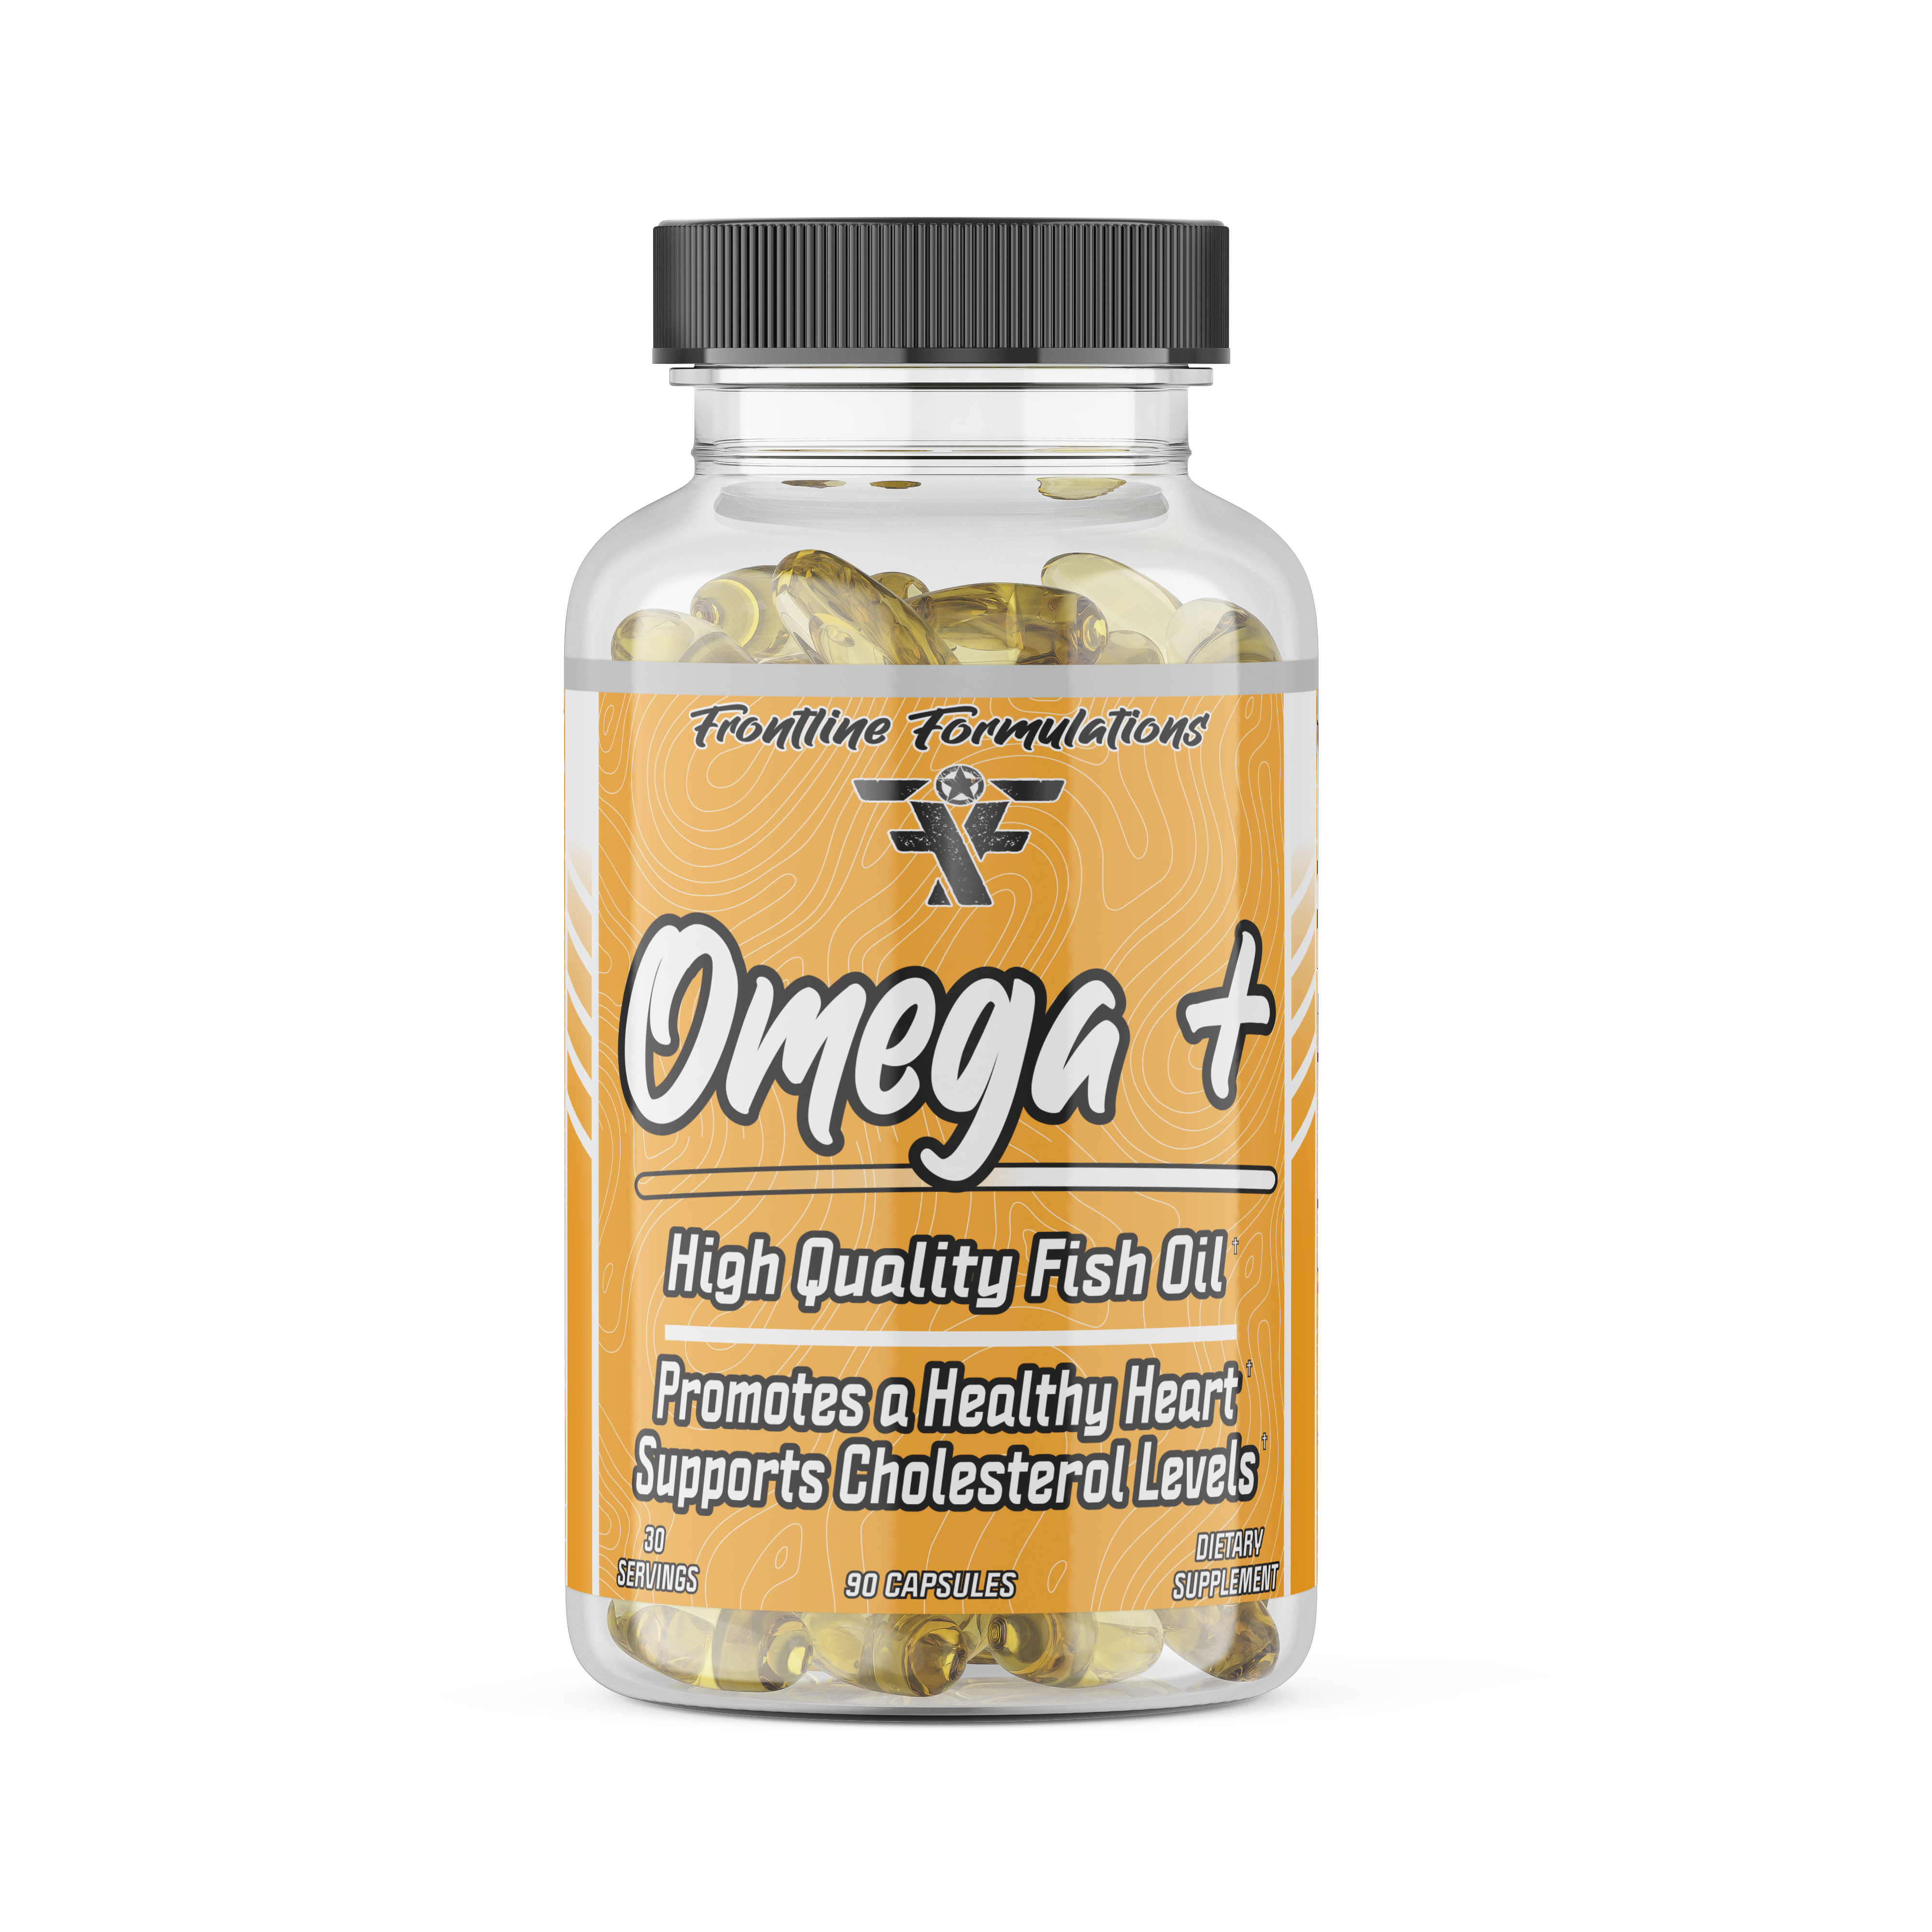 Omega+ Omega+ Omega 3 Vitamins (90 capsules) High-quality fish oil: Made from fresh, wild-caught fish, so you get up to 3x more omega-3 fatty acids. Refined using molecular distillation to preserve the purity of every capsule which has the perfect ratio o